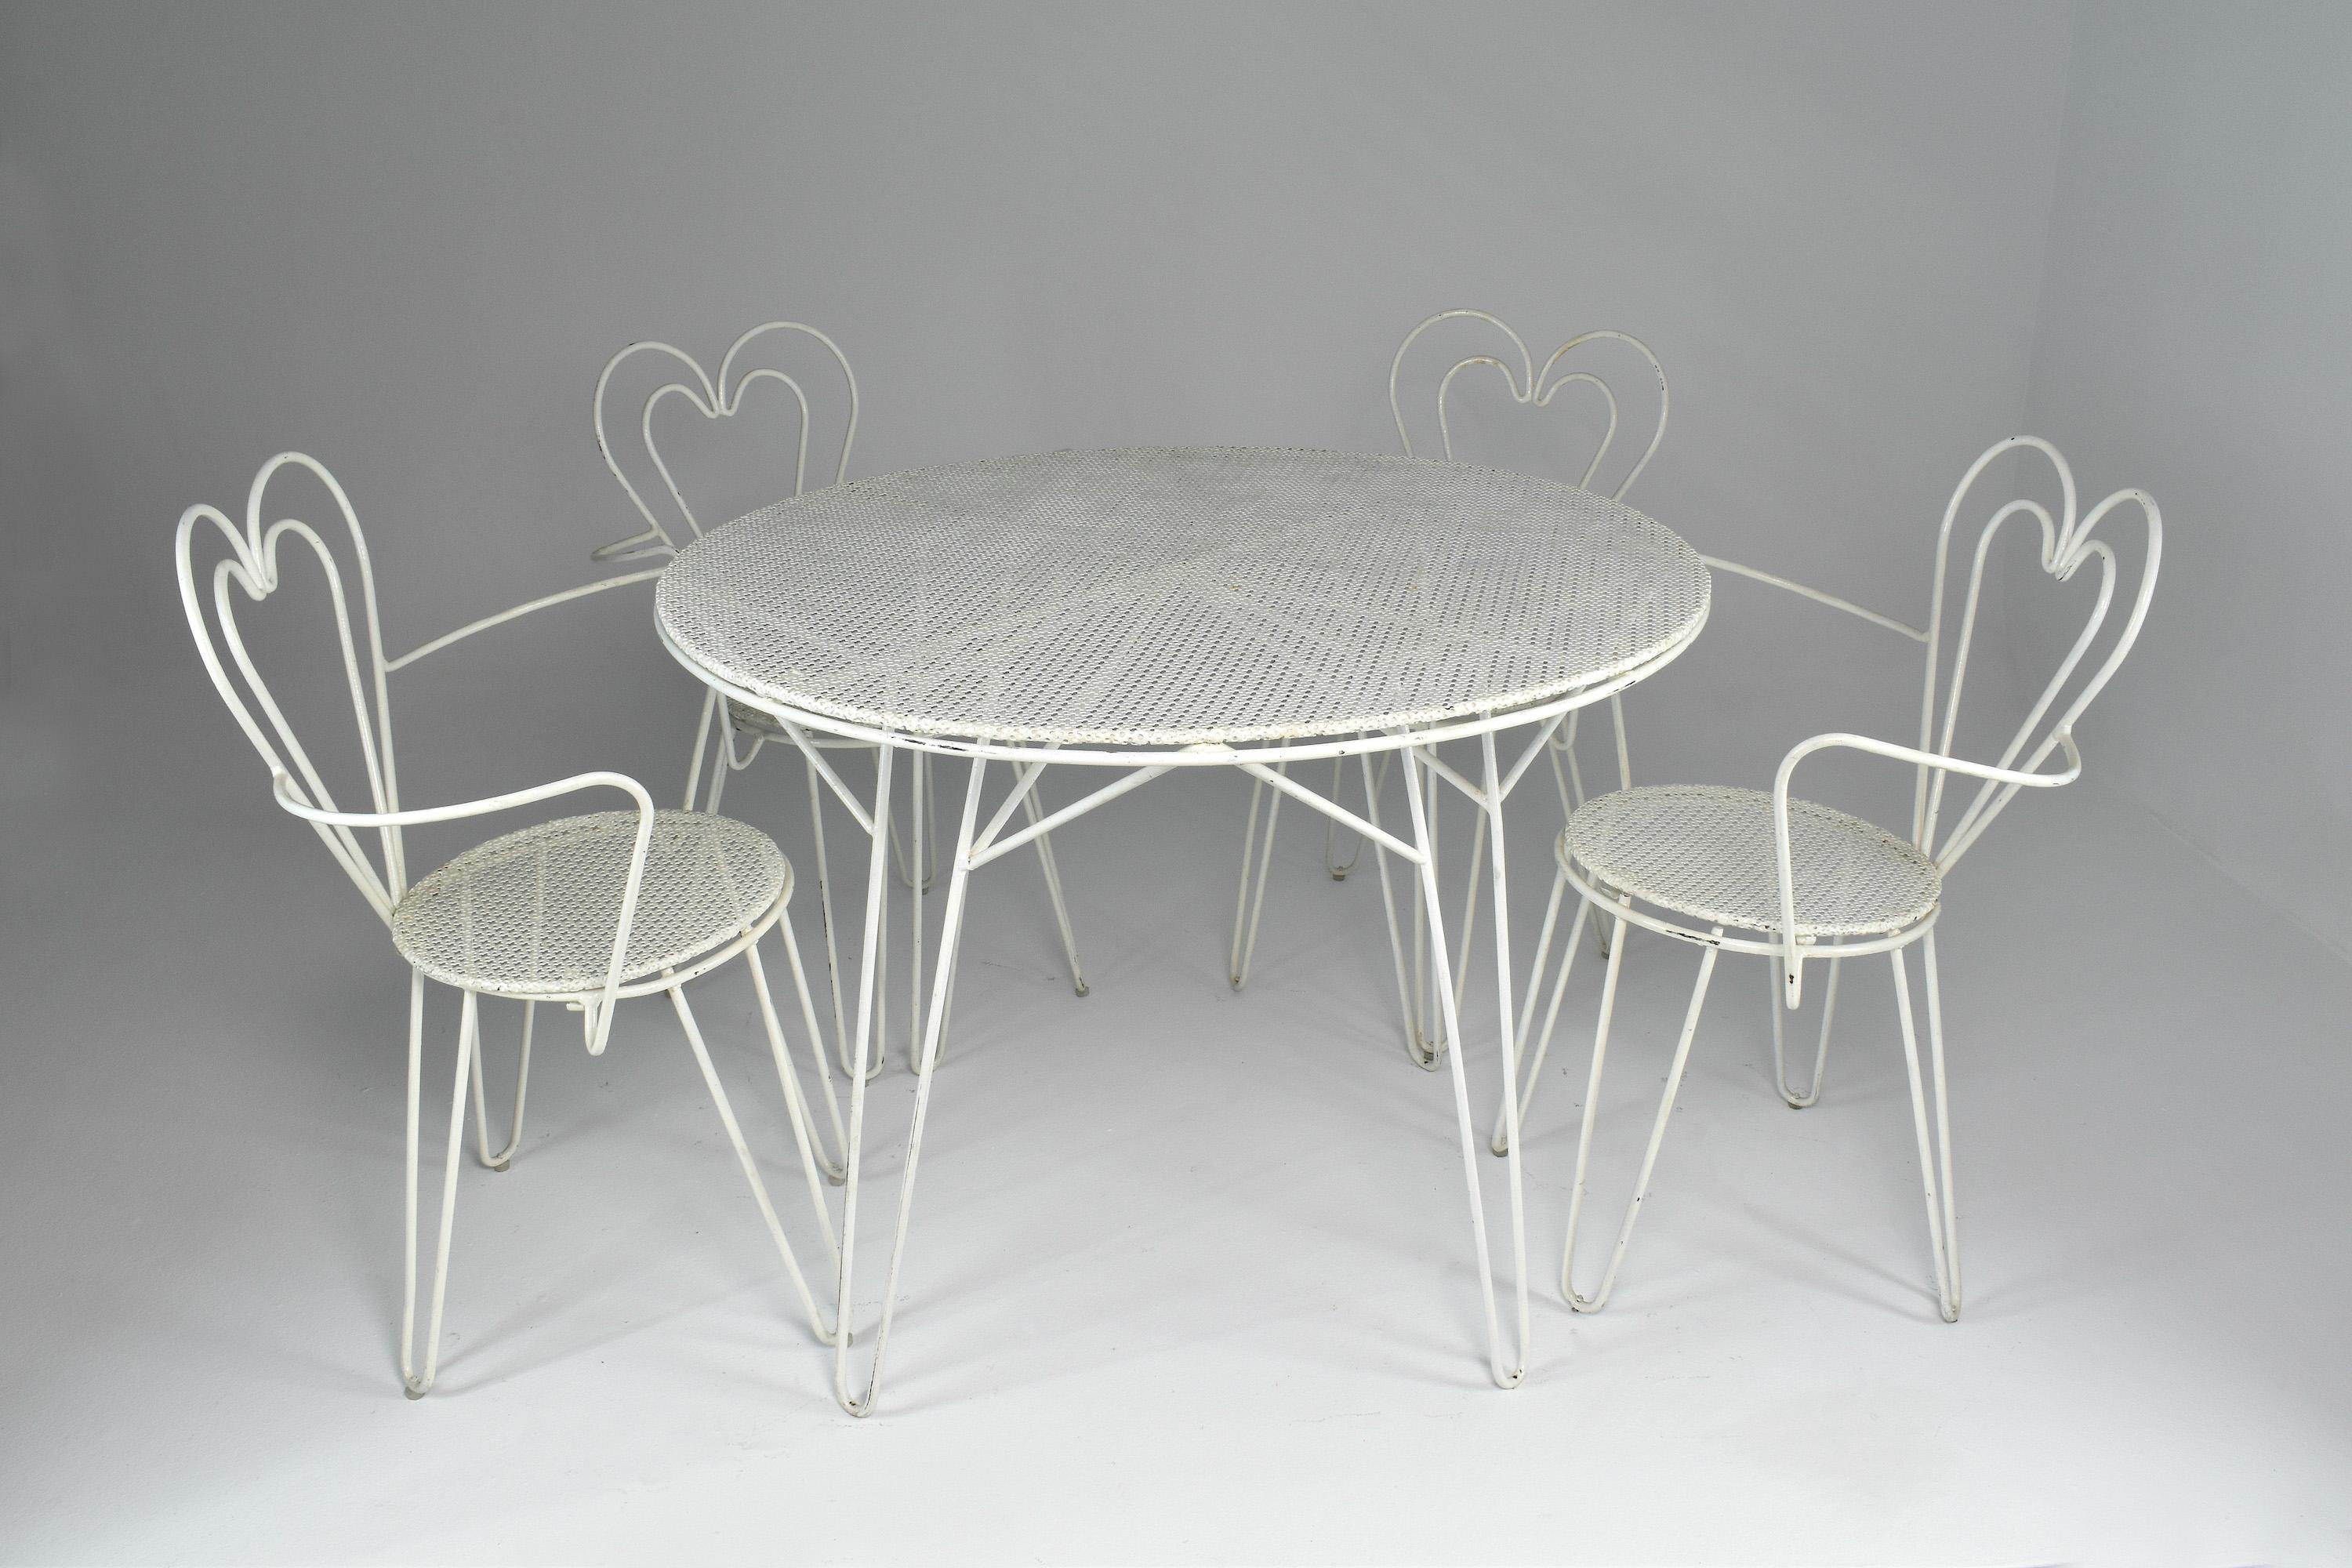 A beautiful assemble attributed to the iconic French mid-century designer Mathieu Mategot composed of a circular garden table and four heart-shaped chairs. These collectible pieces are made of his signature perforated sheet and white tubular